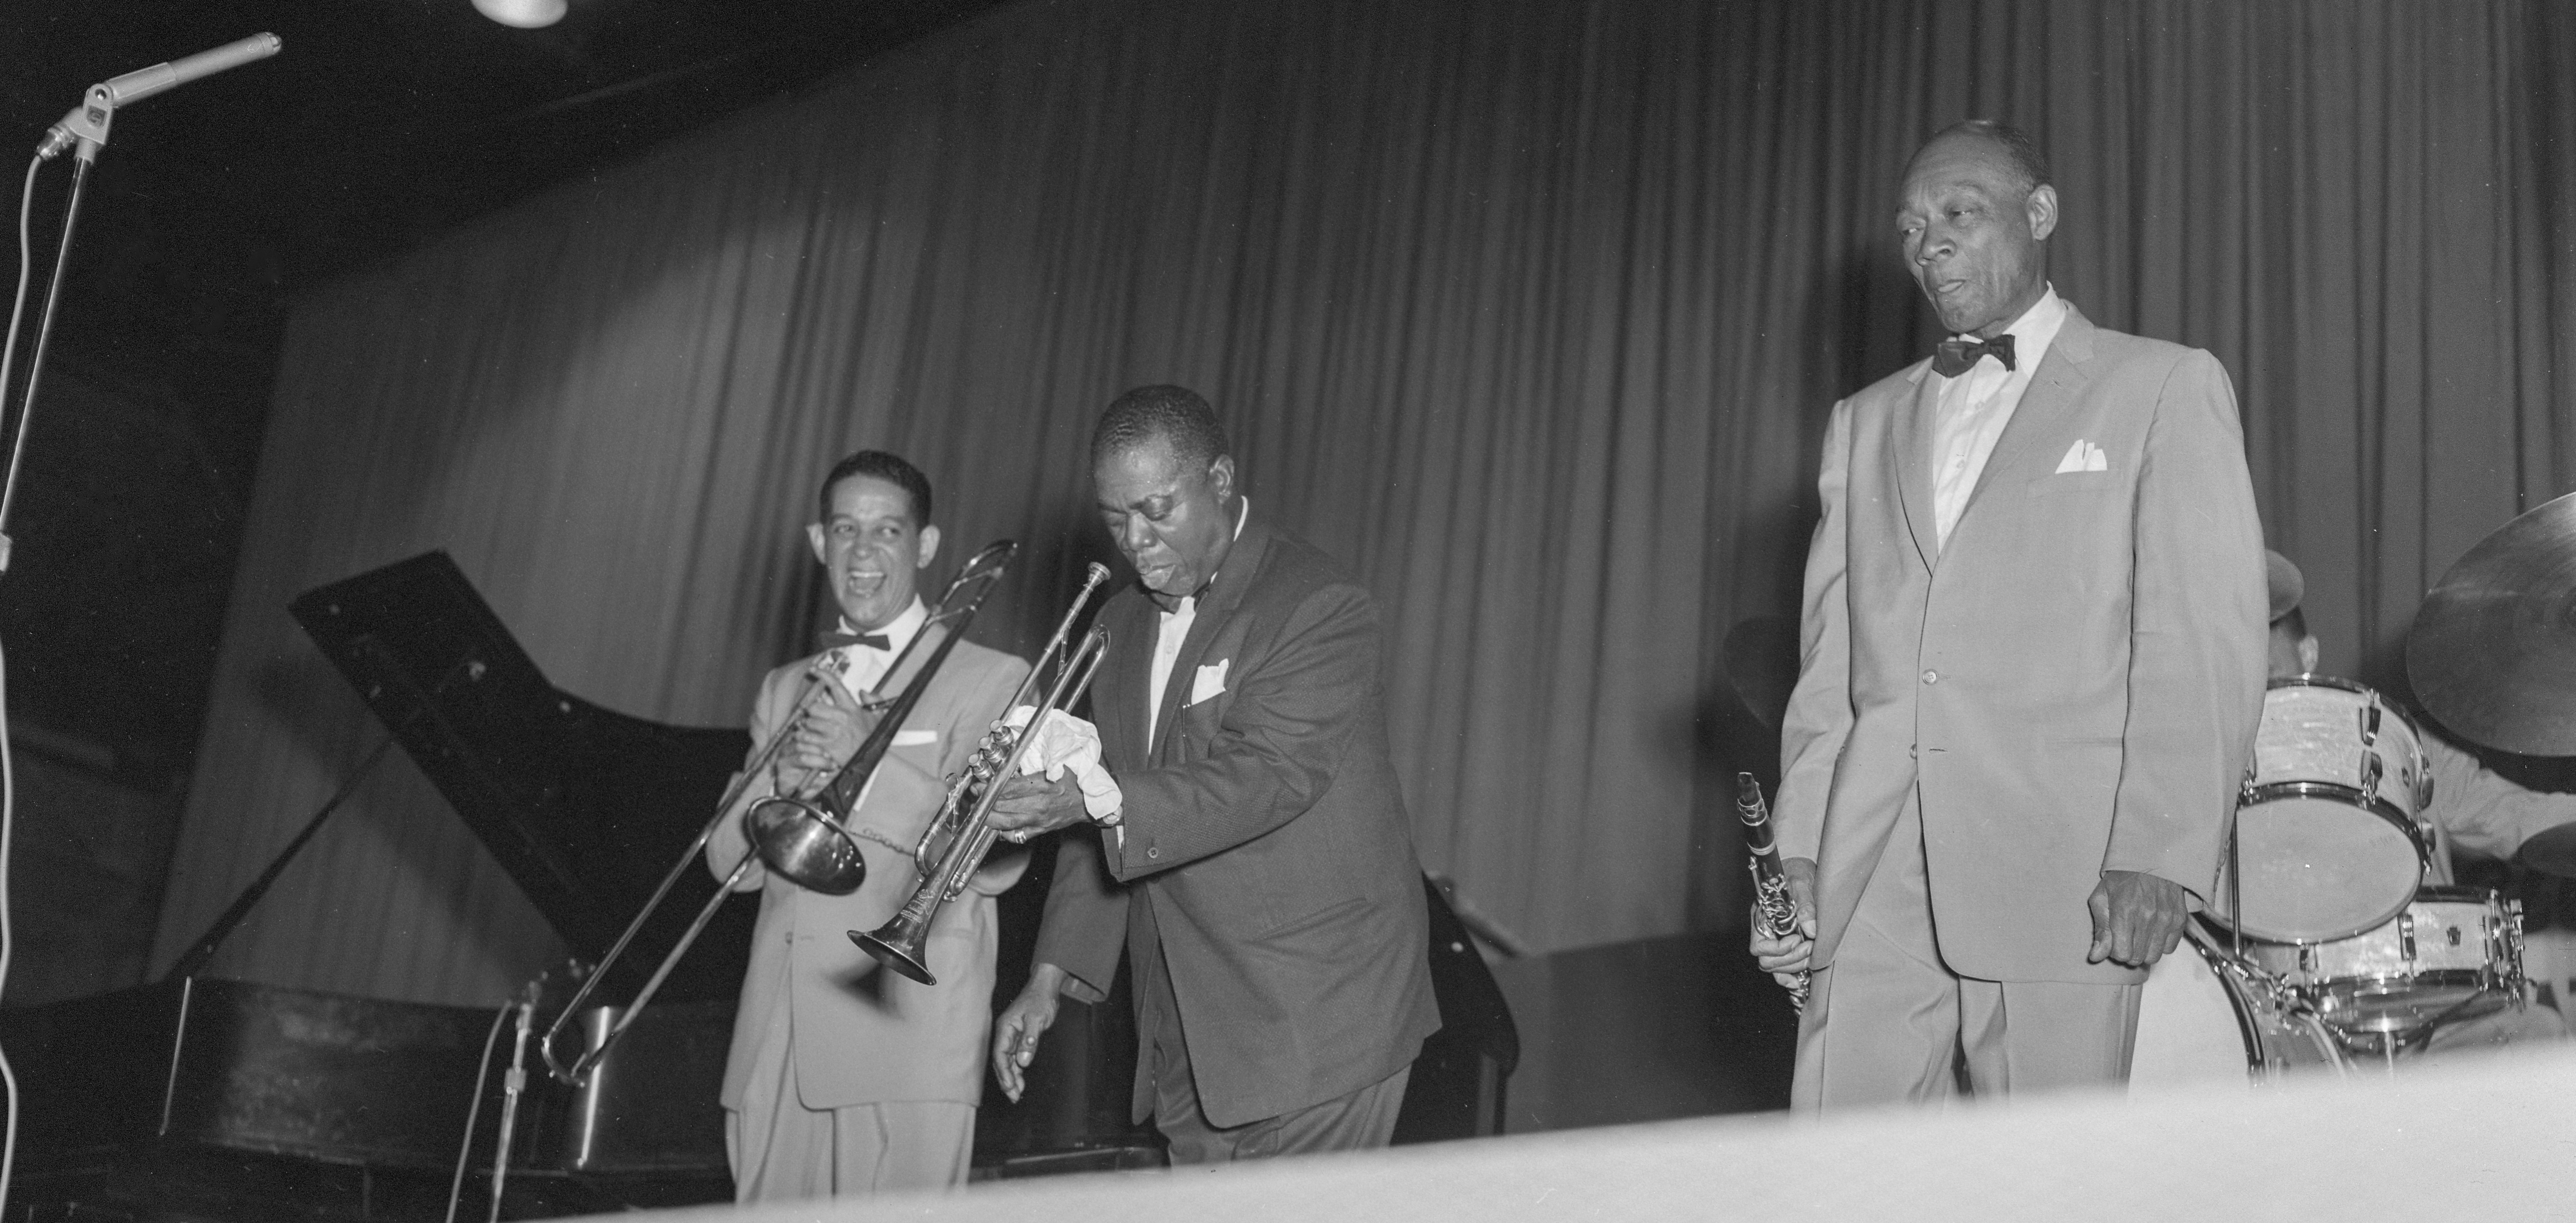 Louis Armstrong and the All-Stars Edmonton Gardens playing music. Image from Provincial Archives of Alberta.